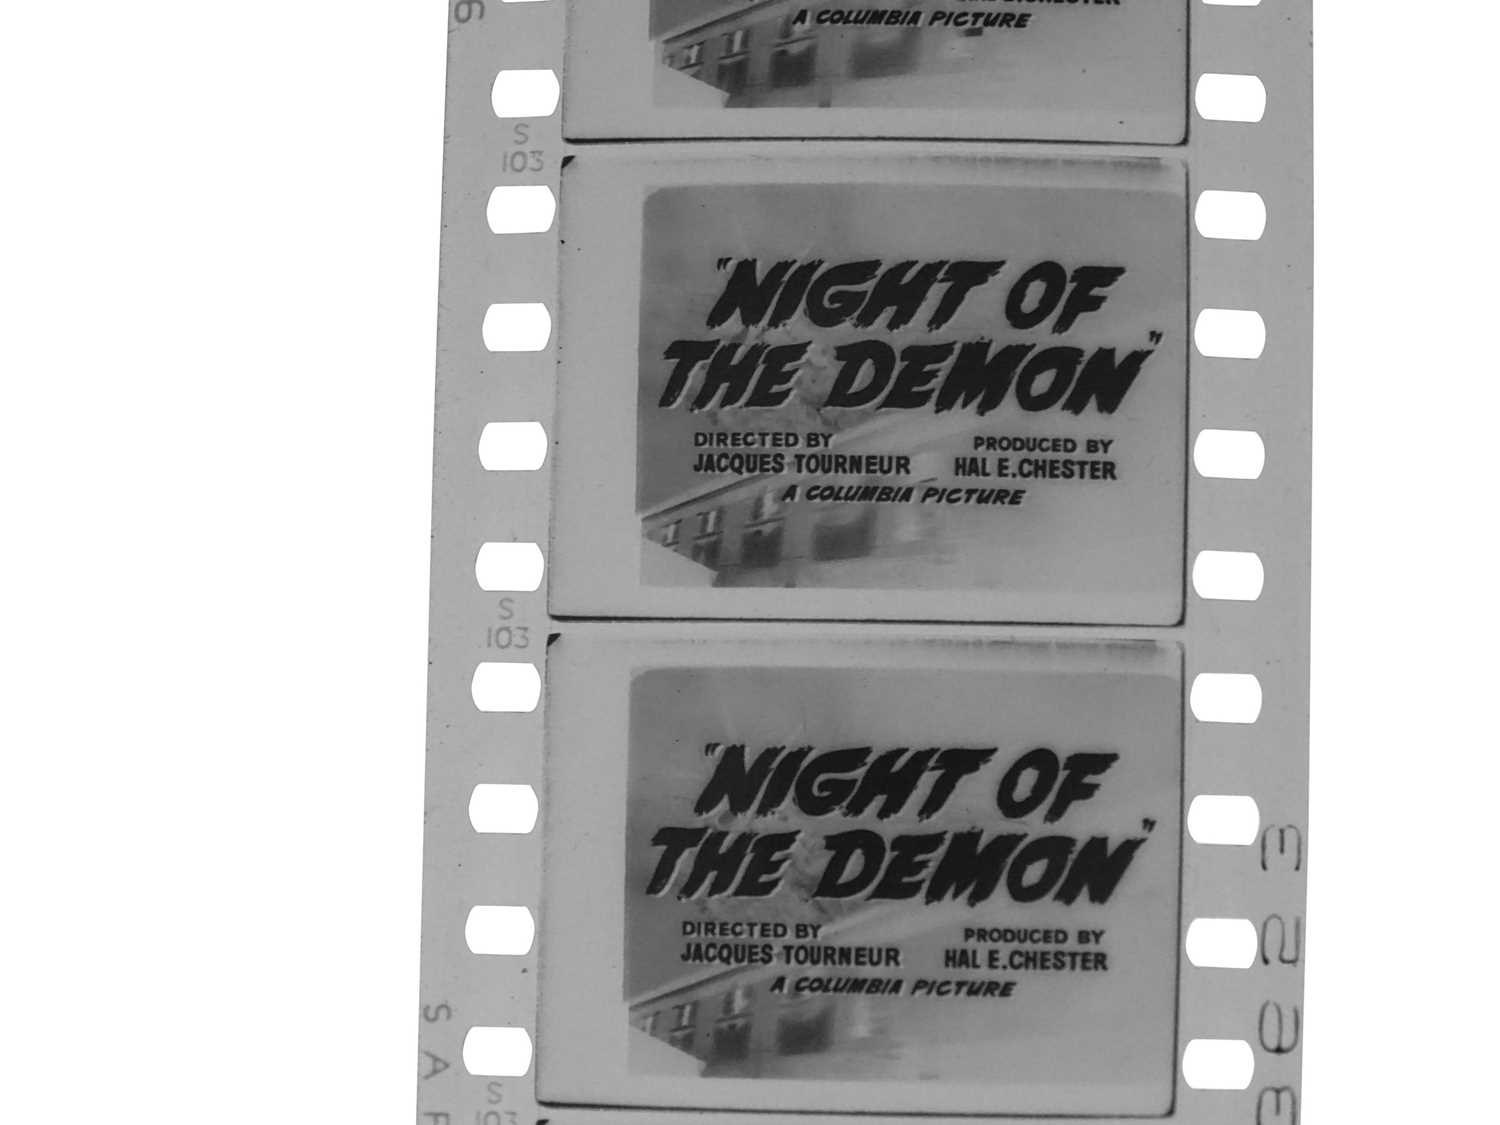 Night Of The Demon (1957) - Image 6 of 6